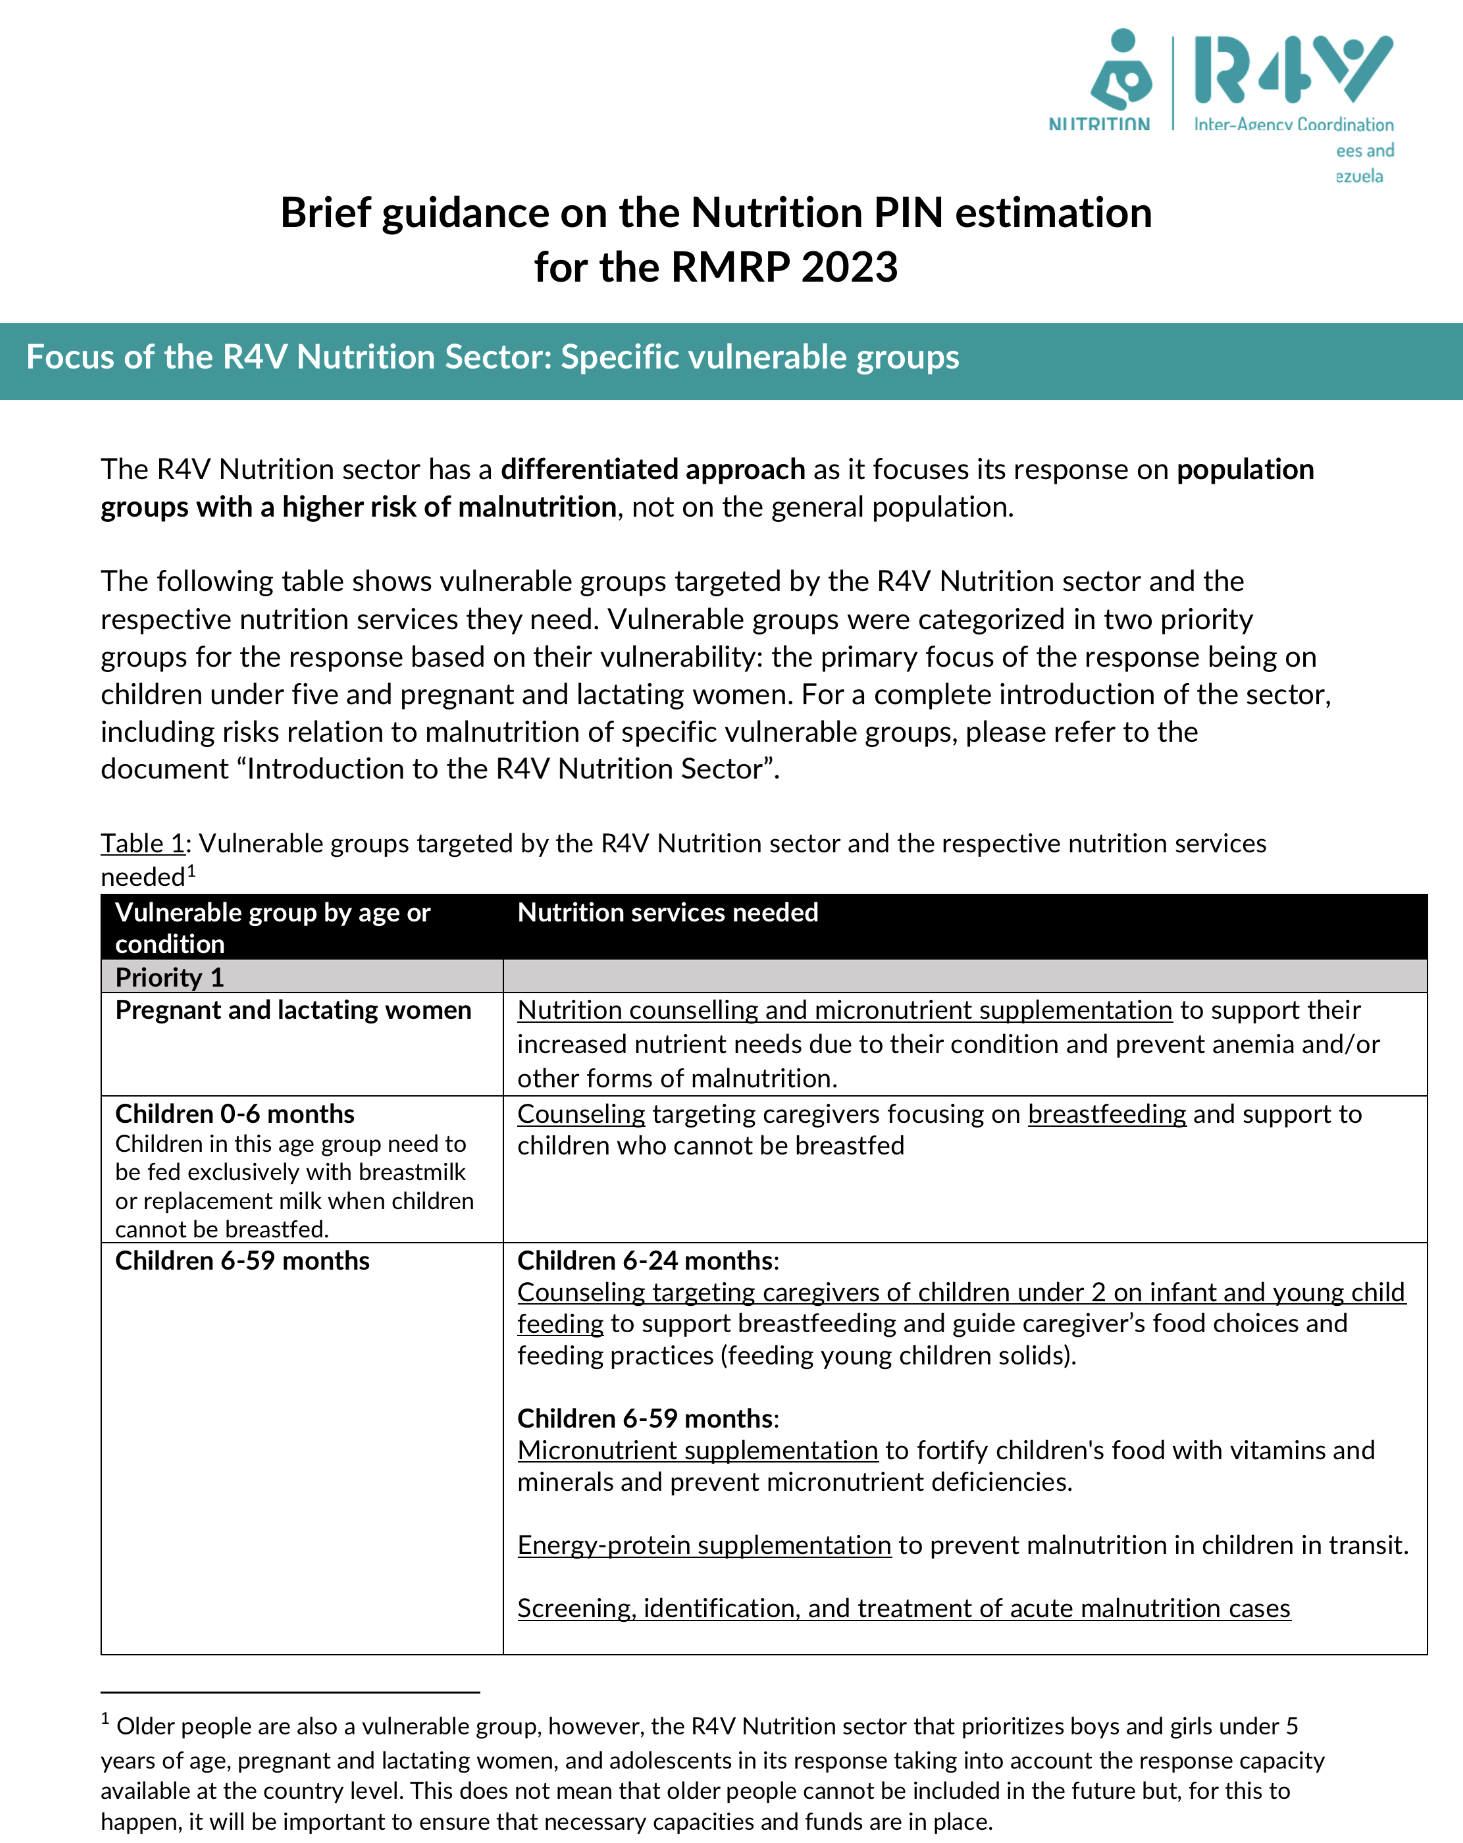 Brief guidance on the Nutrition PIN estimation for the RMRP 2023